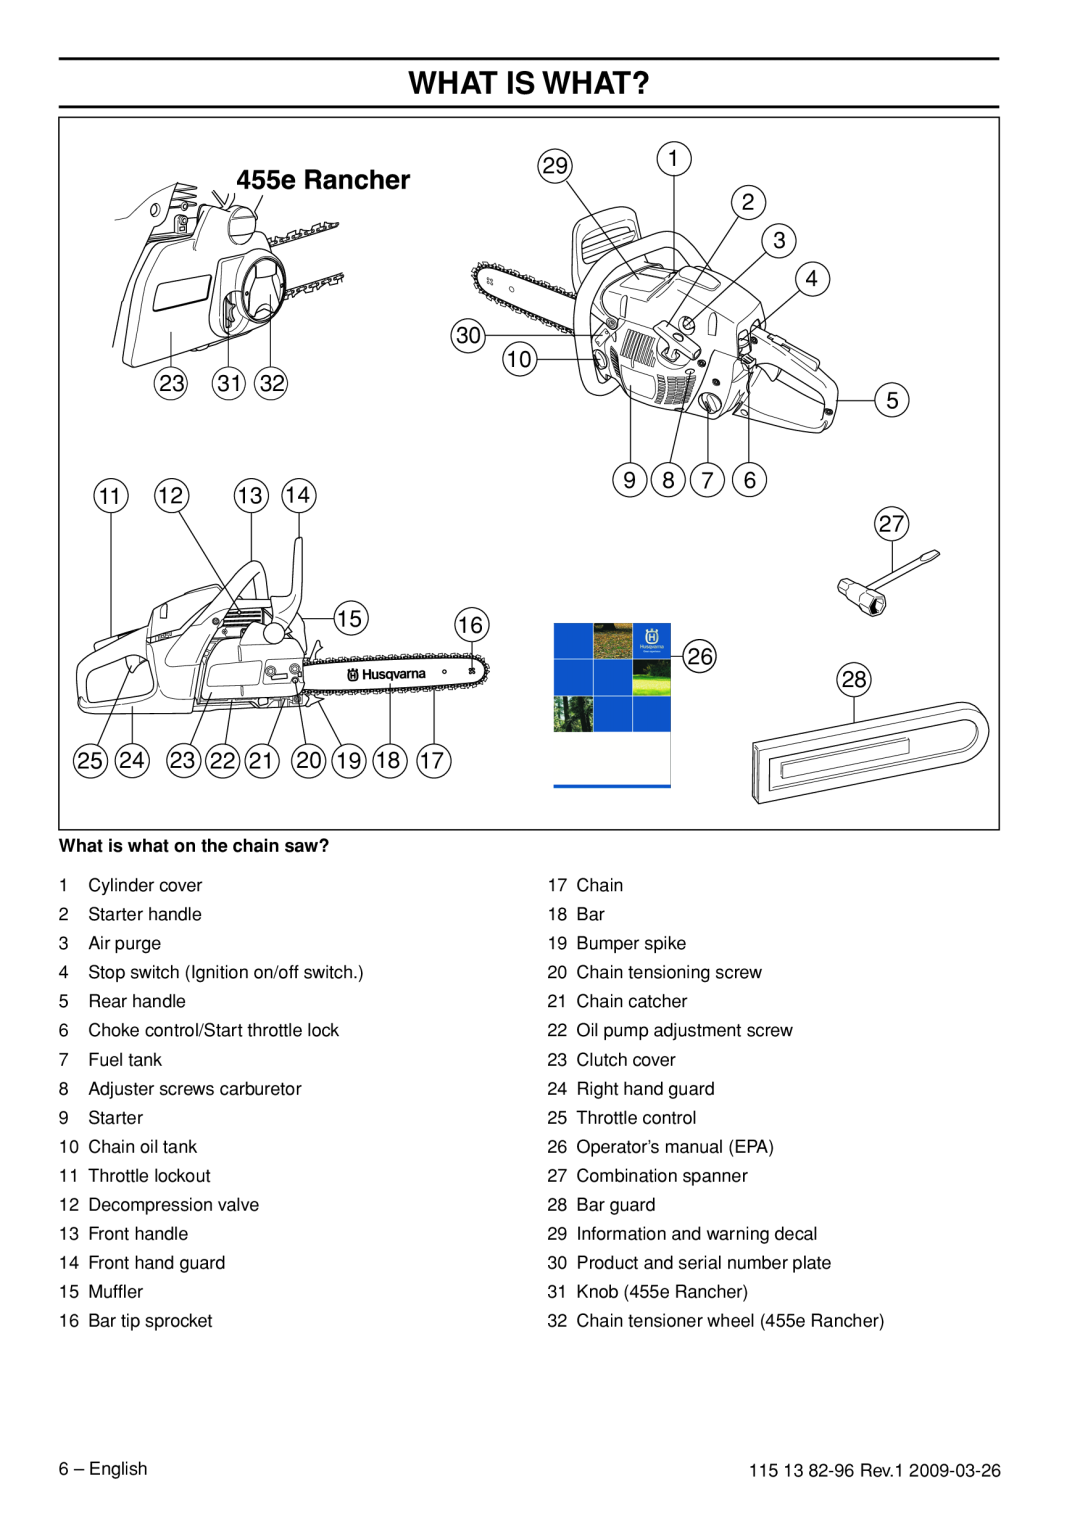 Husqvarna 460 Rancher, 115 13 82-96 manual What Is What?, What is what on the chain saw? 